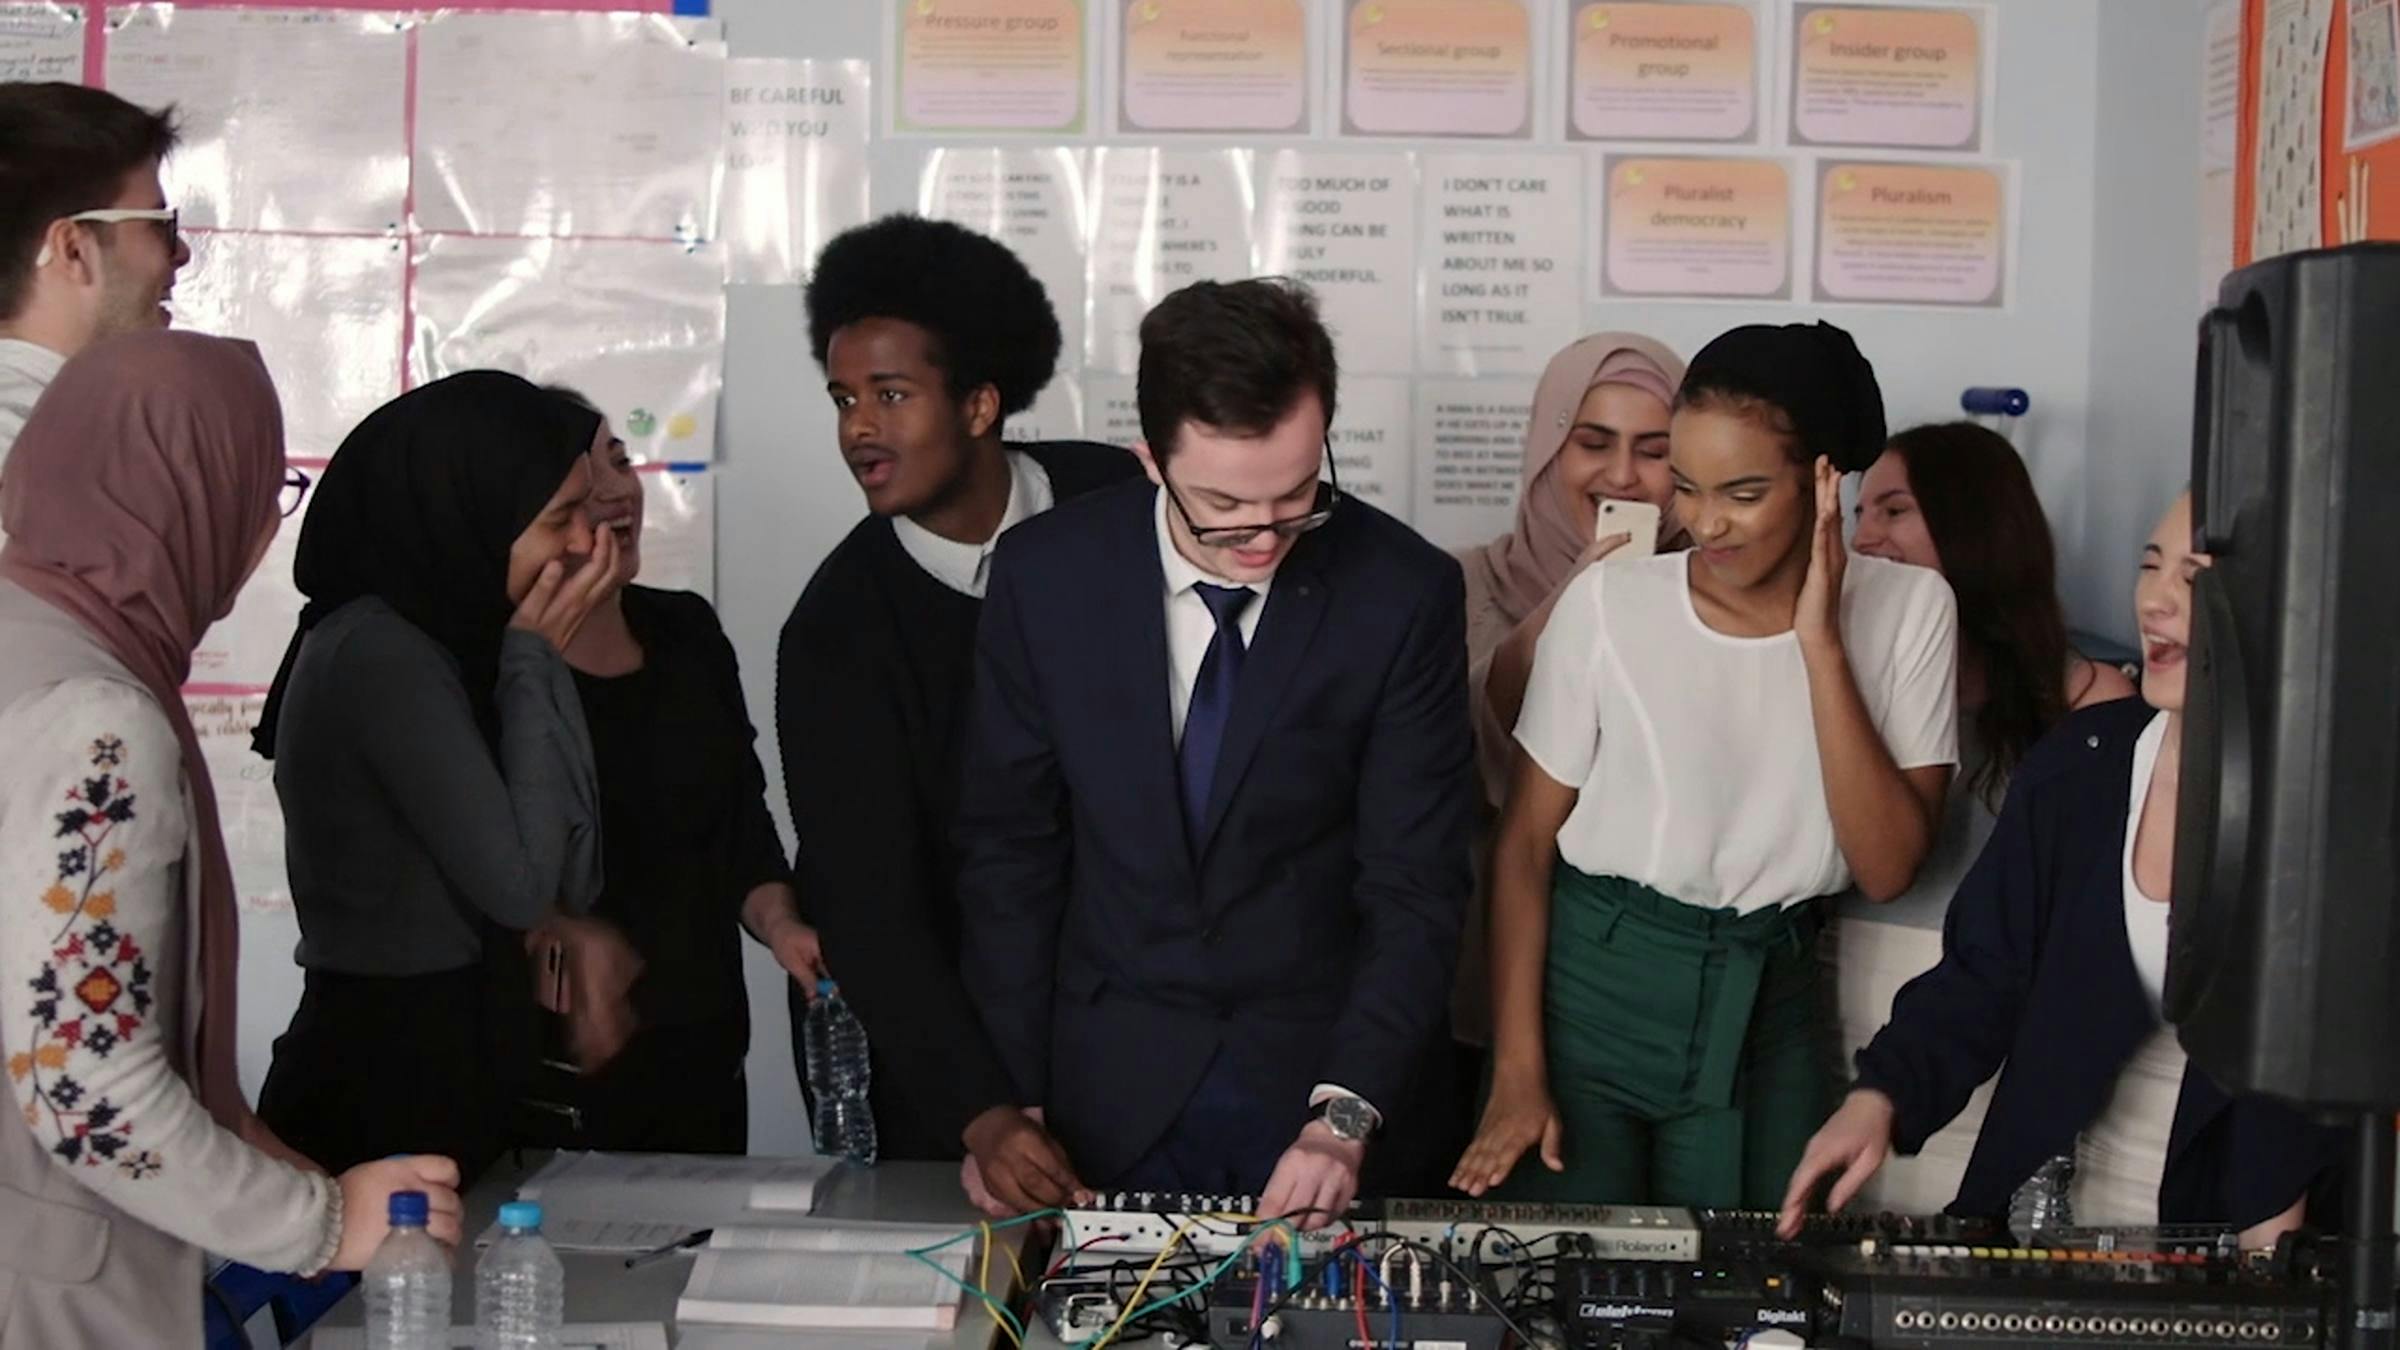 an image of a group of school children and their teacher playing on synthesizers